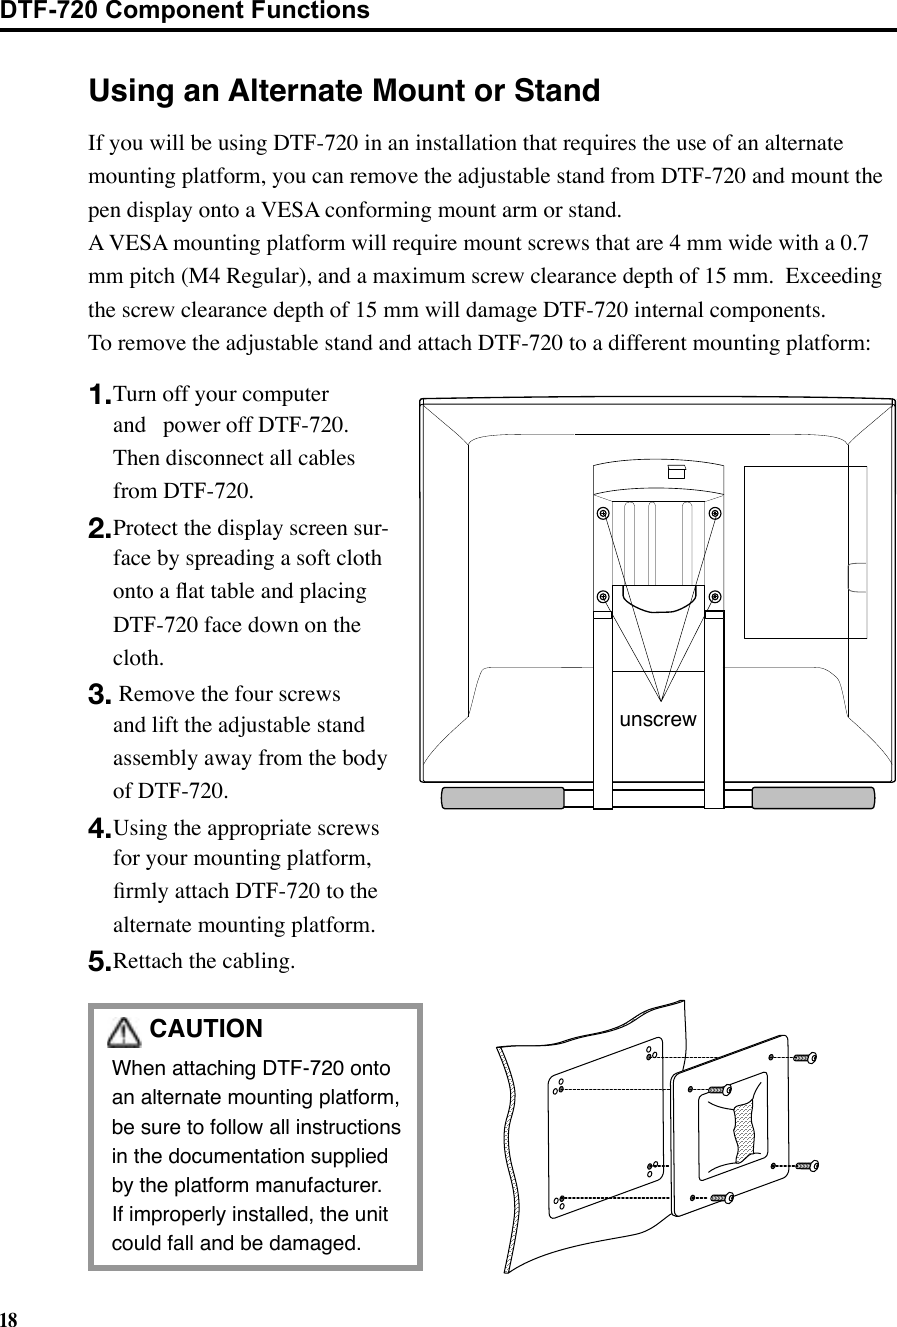 18CAUTION When attaching DTF-720 onto an alternate mounting platform, be sure to follow all instructions in the documentation supplied by the platform manufacturer.   If improperly installed, the unit could fall and be damaged.Using an Alternate Mount or Standunscrew1. Turn off your computer and  power off DTF-720.  Then disconnect all cables from DTF-720.2. Protect the display screen sur-face by spreading a soft cloth onto a ﬂat table and placing DTF-720 face down on the cloth.3.  Remove the four screws and lift the adjustable stand assembly away from the body of DTF-720.4. Using the appropriate screws for your mounting platform, ﬁrmly attach DTF-720 to the alternate mounting platform.5. Rettach the cabling.If you will be using DTF-720 in an installation that requires the use of an alternate mounting platform, you can remove the adjustable stand from DTF-720 and mount the pen display onto a VESA conforming mount arm or stand.   A VESA mounting platform will require mount screws that are 4 mm wide with a 0.7 mm pitch (M4 Regular), and a maximum screw clearance depth of 15 mm.  Exceeding the screw clearance depth of 15 mm will damage DTF-720 internal components.To remove the adjustable stand and attach DTF-720 to a different mounting platform:DTF-720 Component Functions